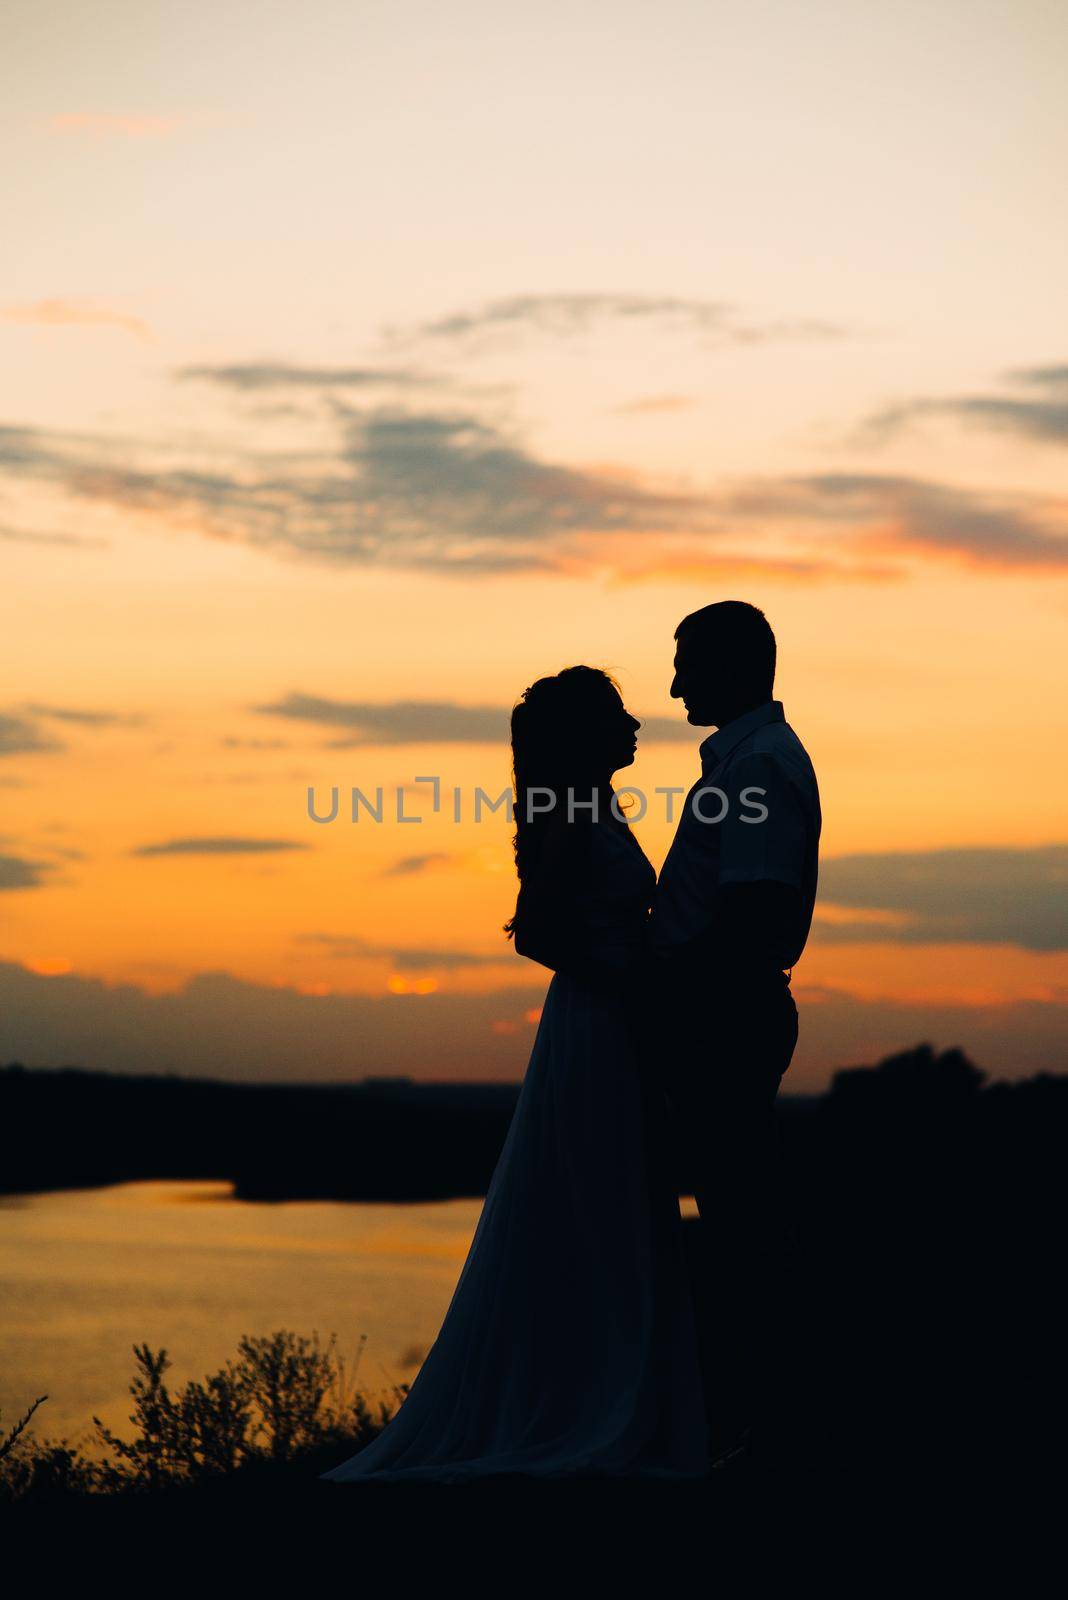 silhouettes of a happy young couple guy and girl on a background of orange sunset in the ocean